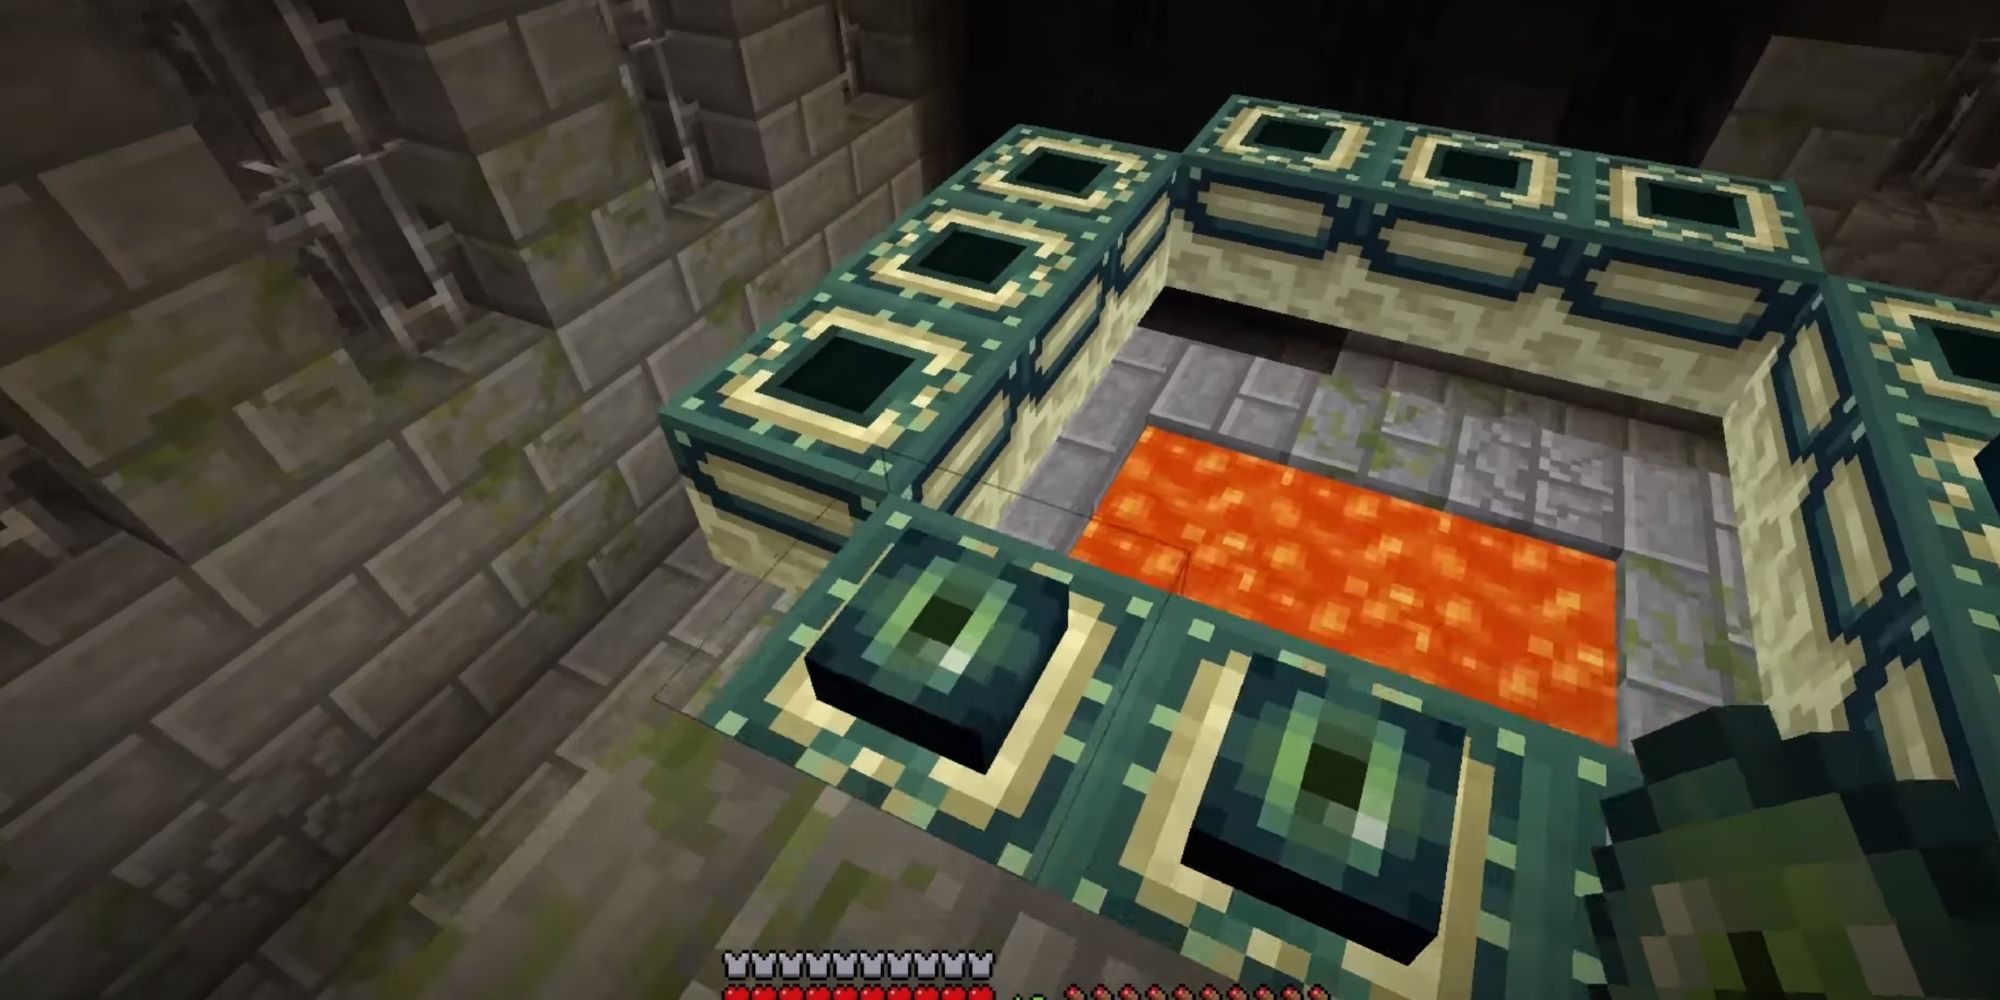 How to Make a Nether Portal and an End Portal in 'Minecraft